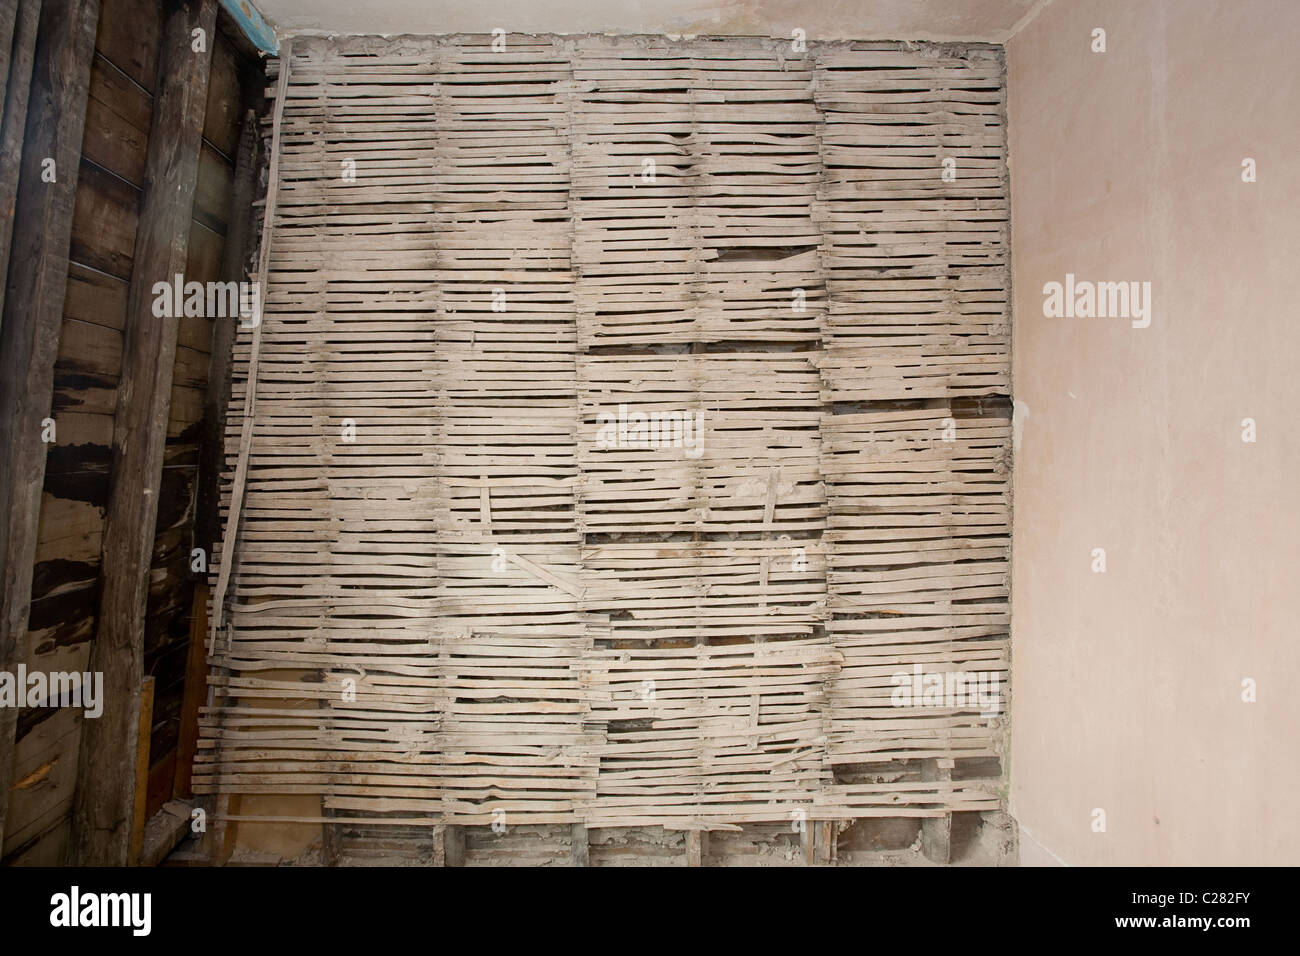 Lath wall with plaster removed Stock Photo